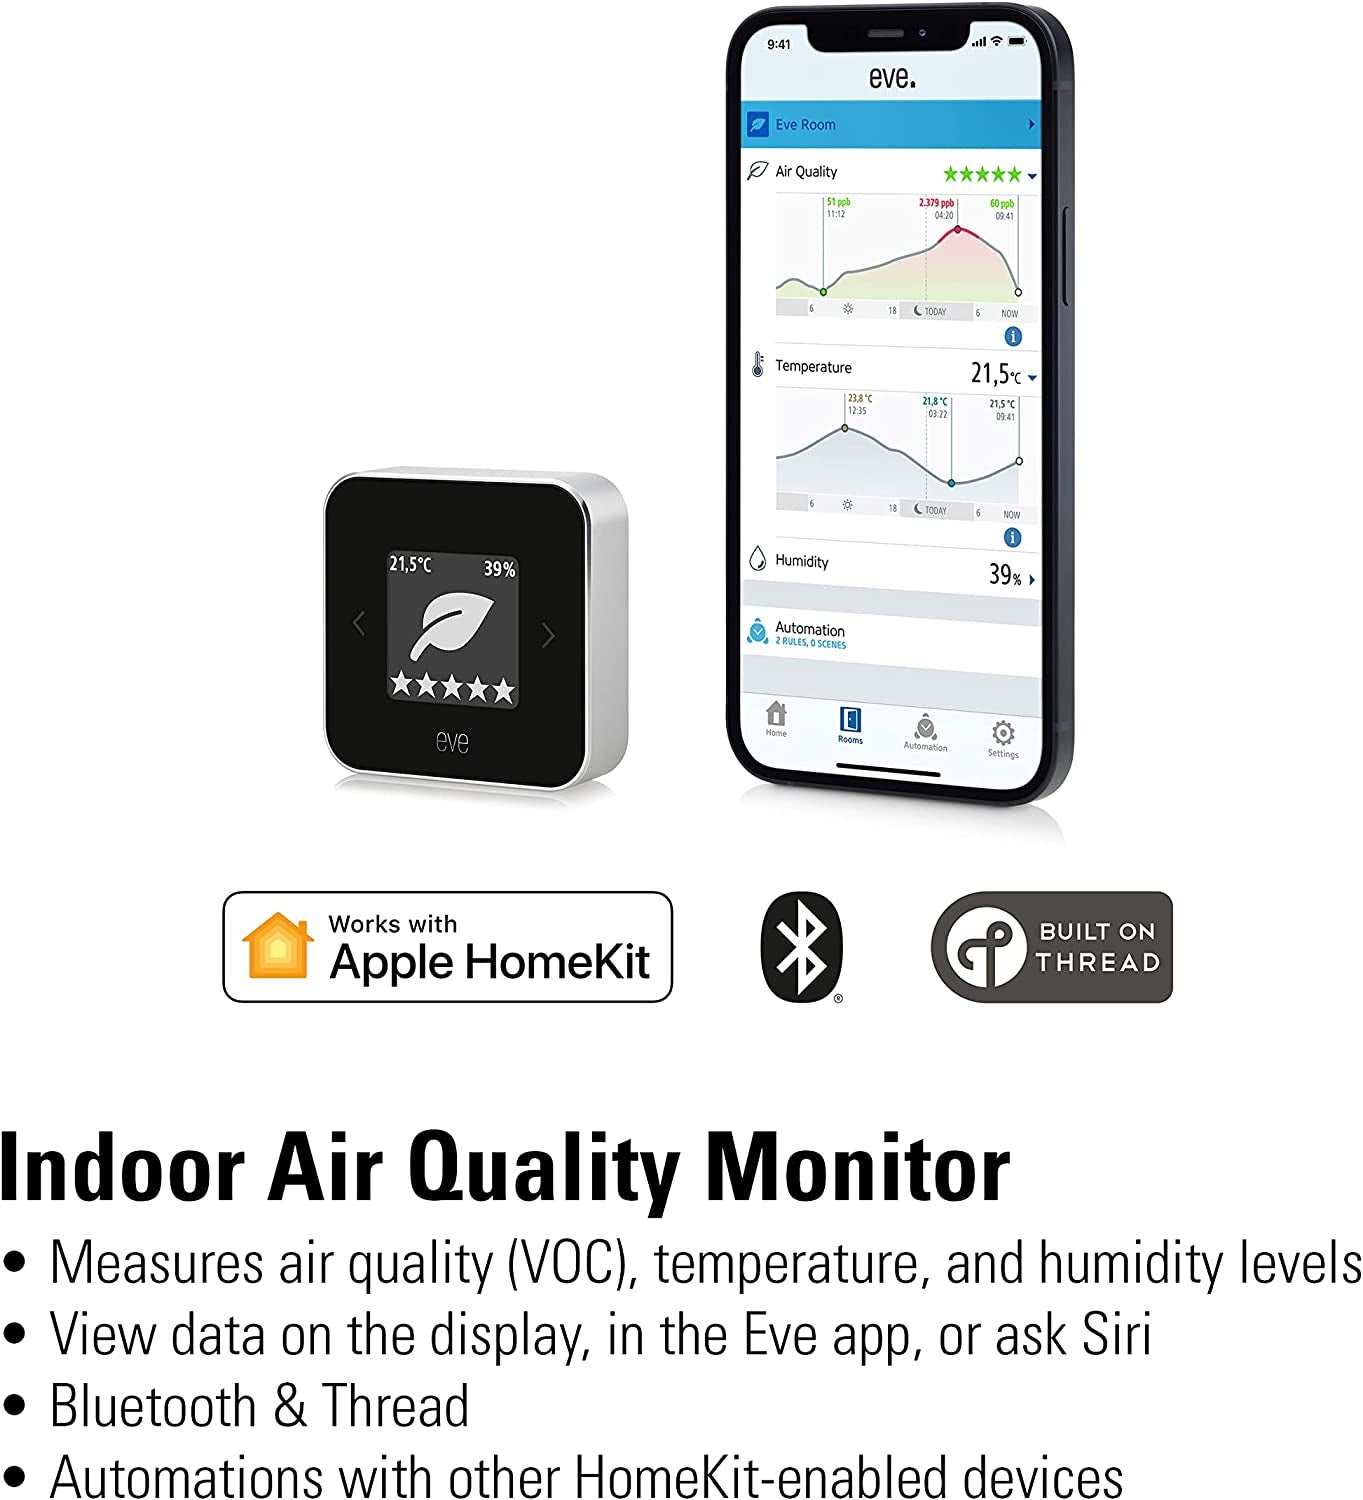 Eve, Eve Room - Indoor Air Quality Sensor to Monitor Air Quality (VOC), Temperature and Humidity, Apple Homekit Technology, Bluetooth, Thread